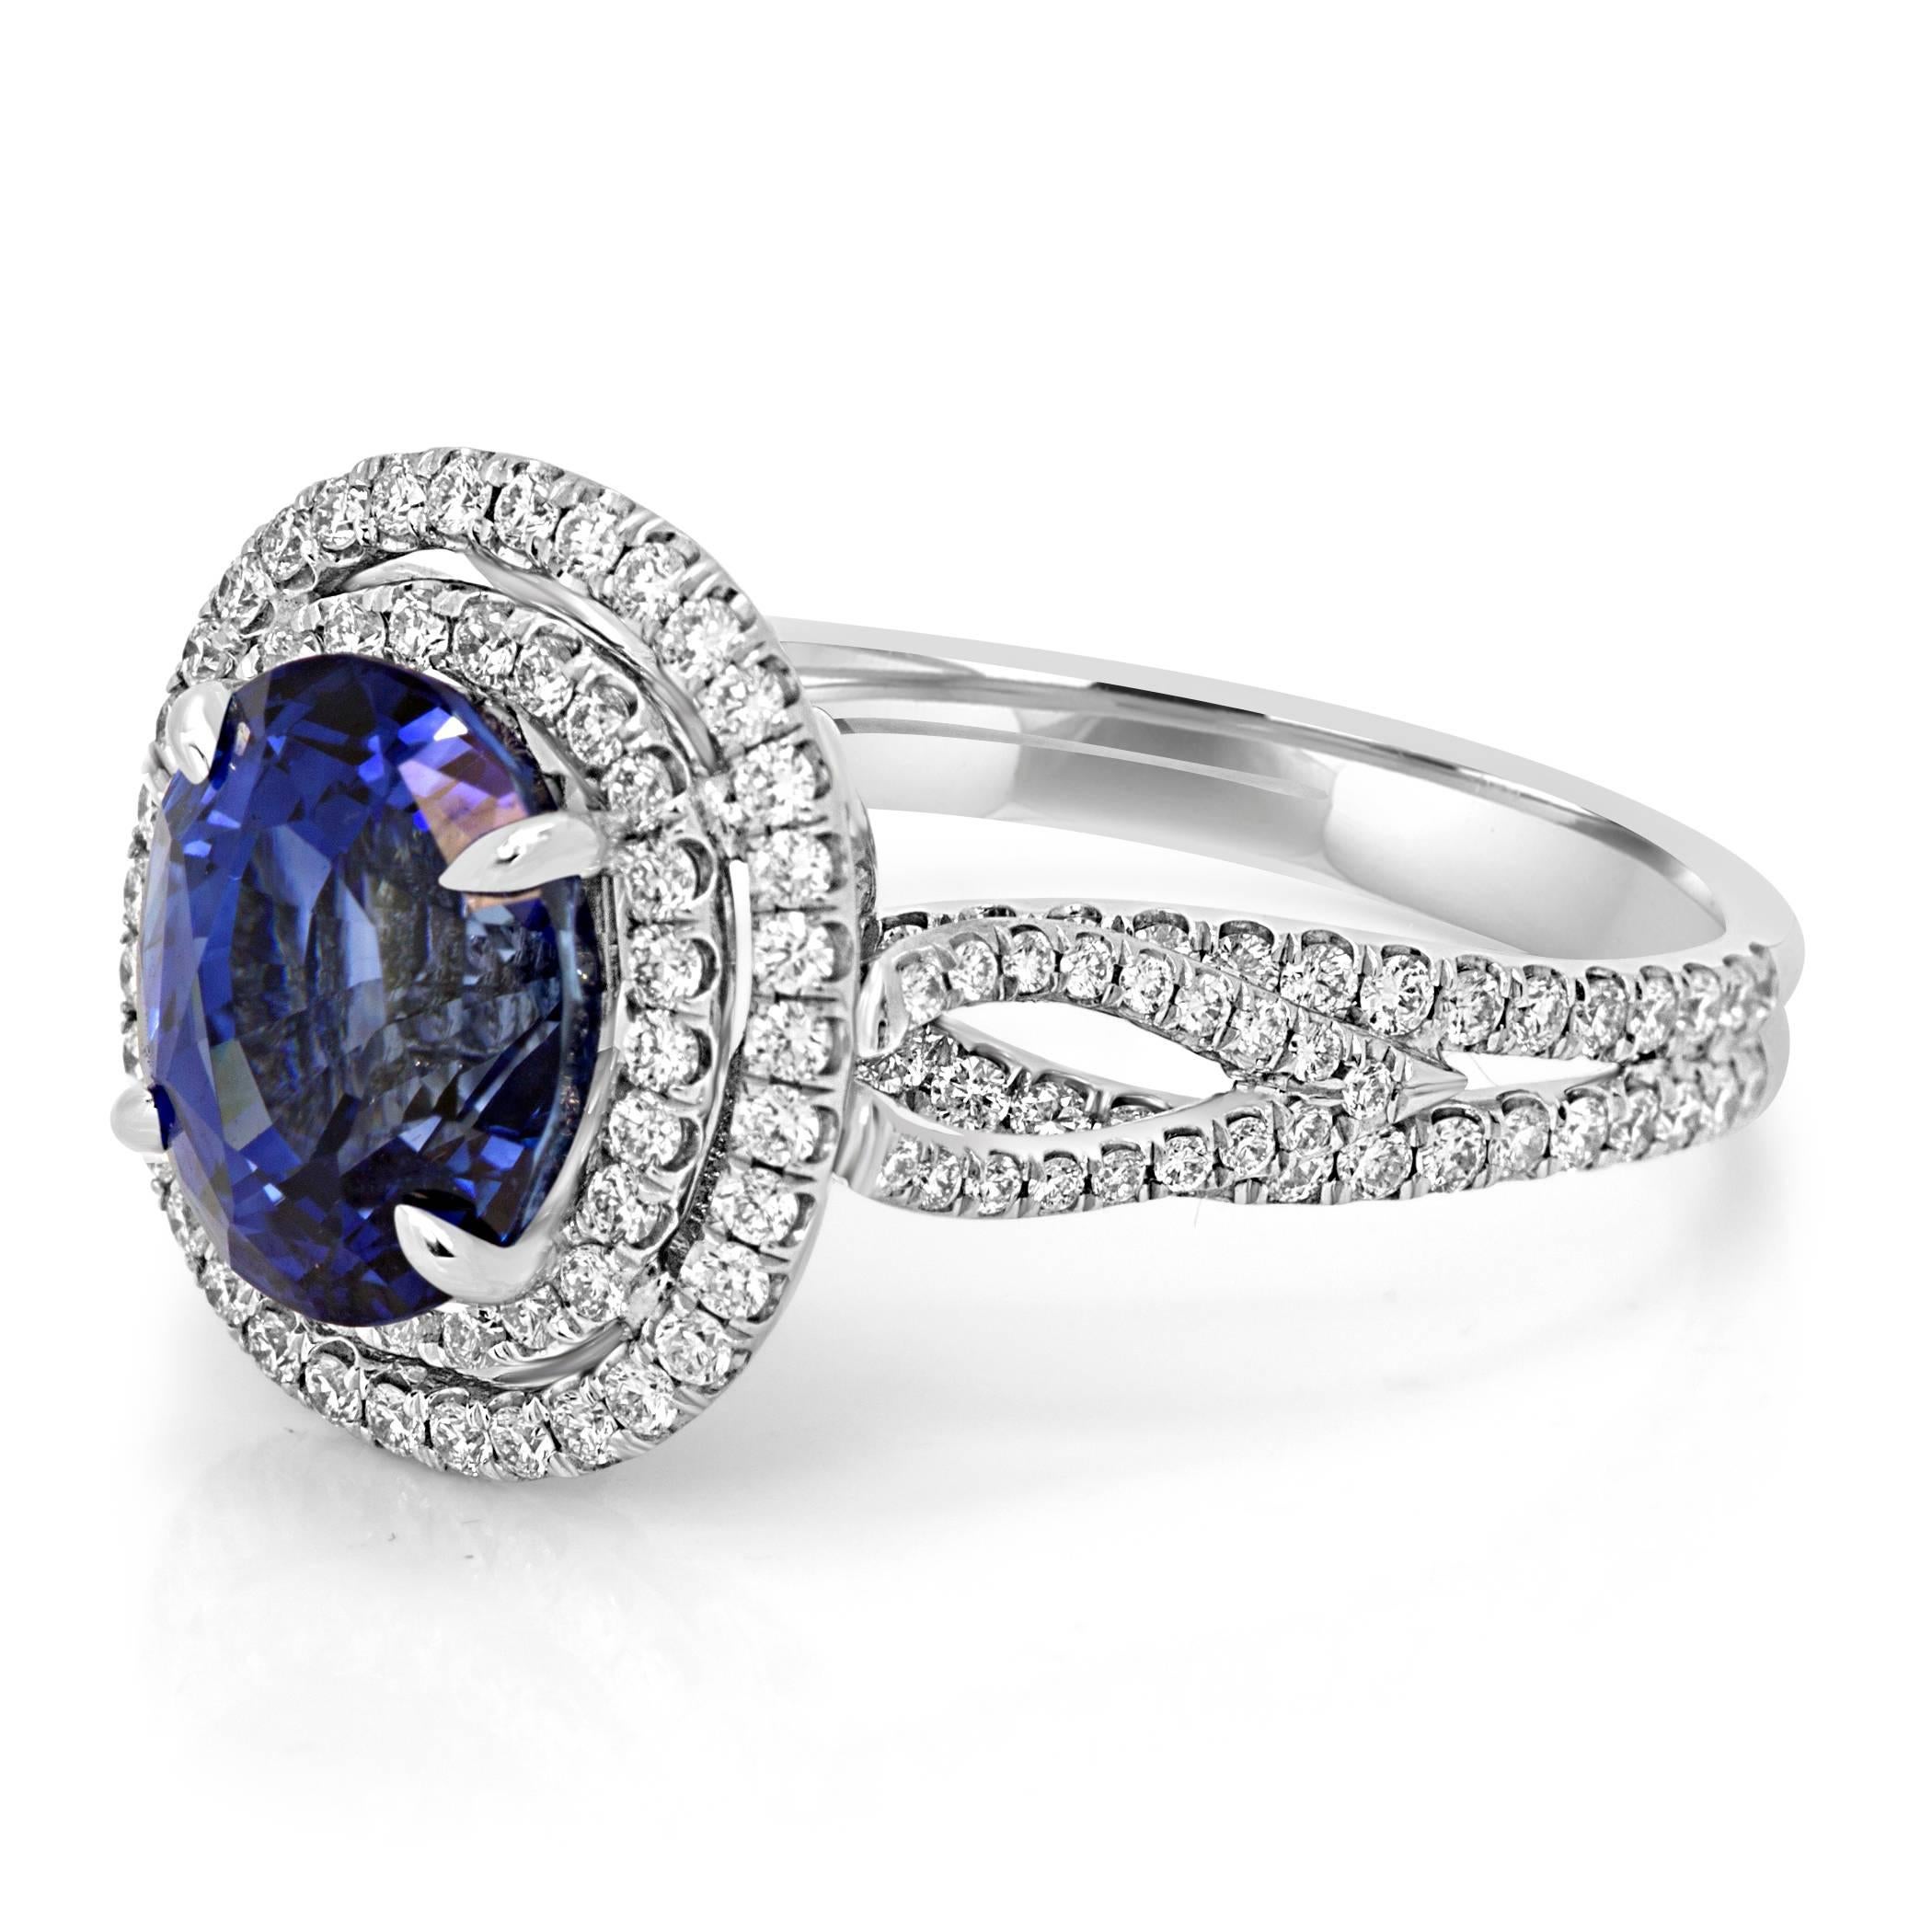 Stunning GIA Certified 4.30 Carat Oval Blue Sapphire encircled in a Double Halo of Round White Diamonds 1.00 Carat in a very Classy and Intricately made 18K White Gold Ring.

Style available in different price ranges. Prices are based on your